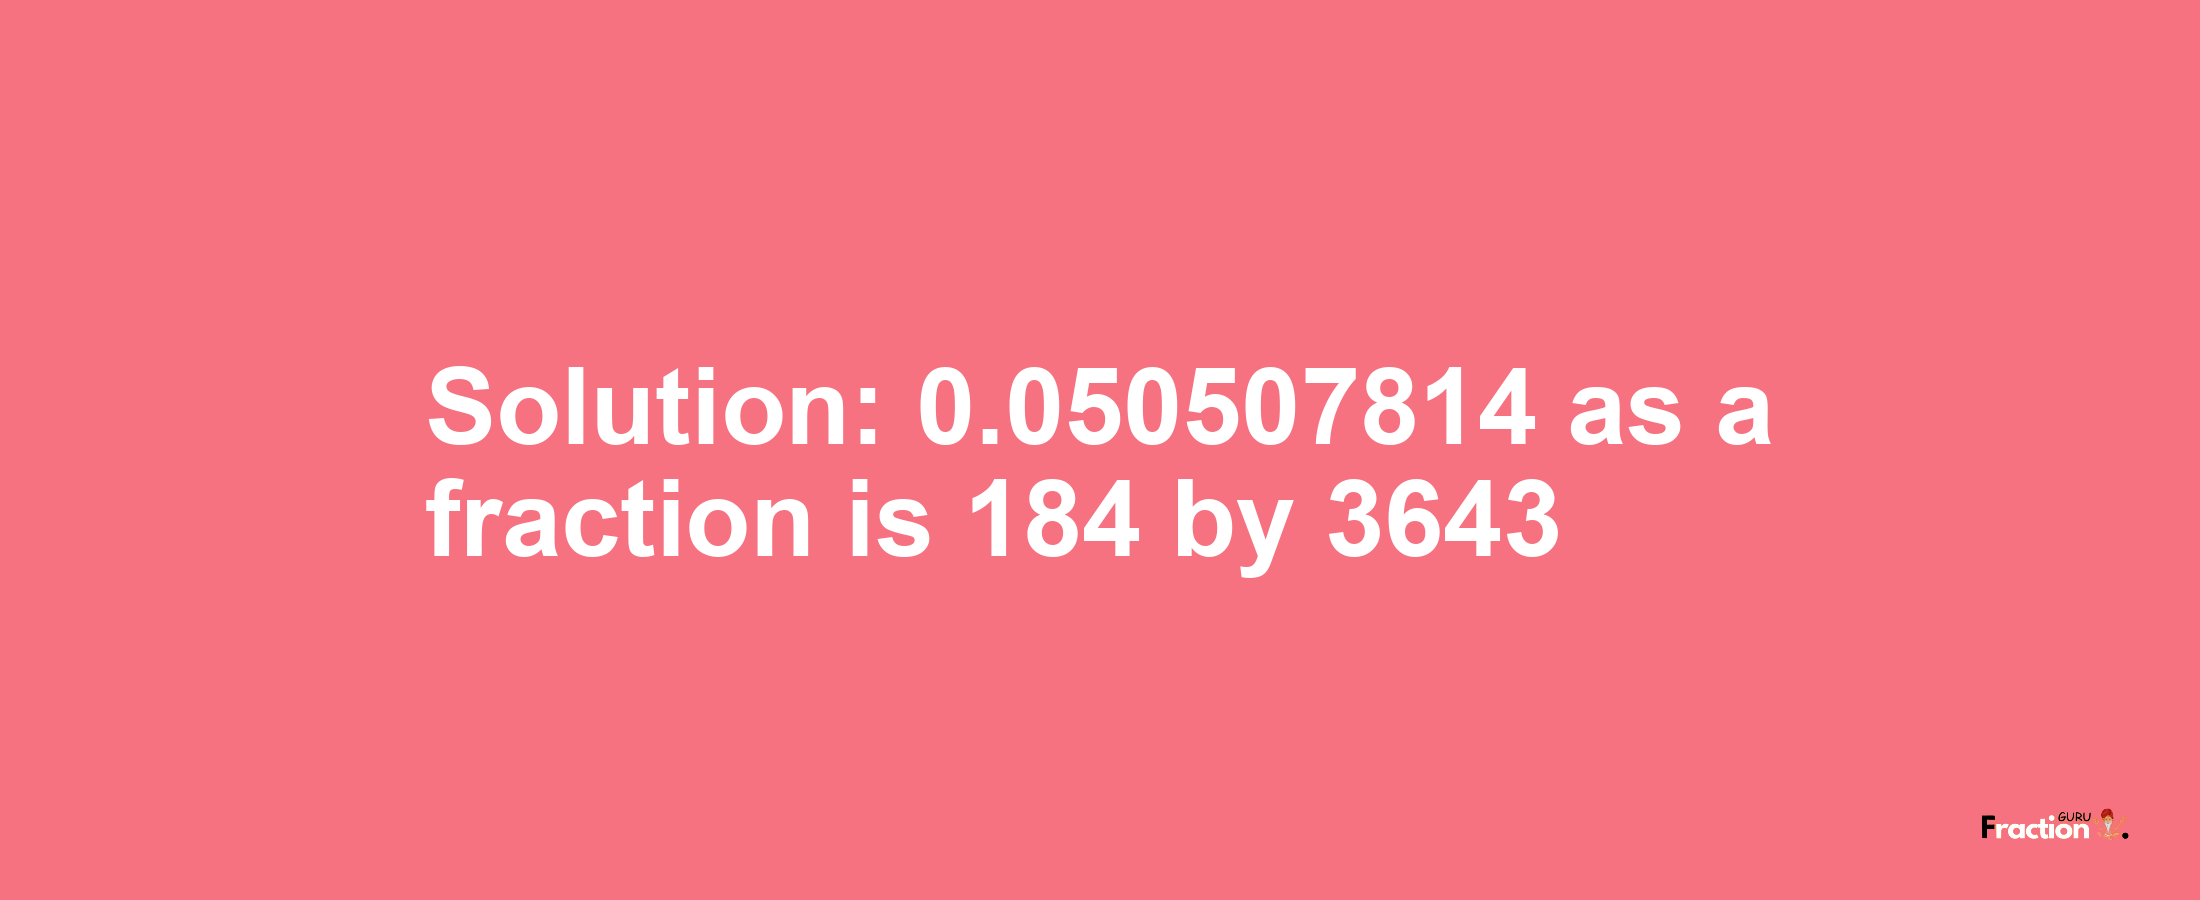 Solution:0.050507814 as a fraction is 184/3643